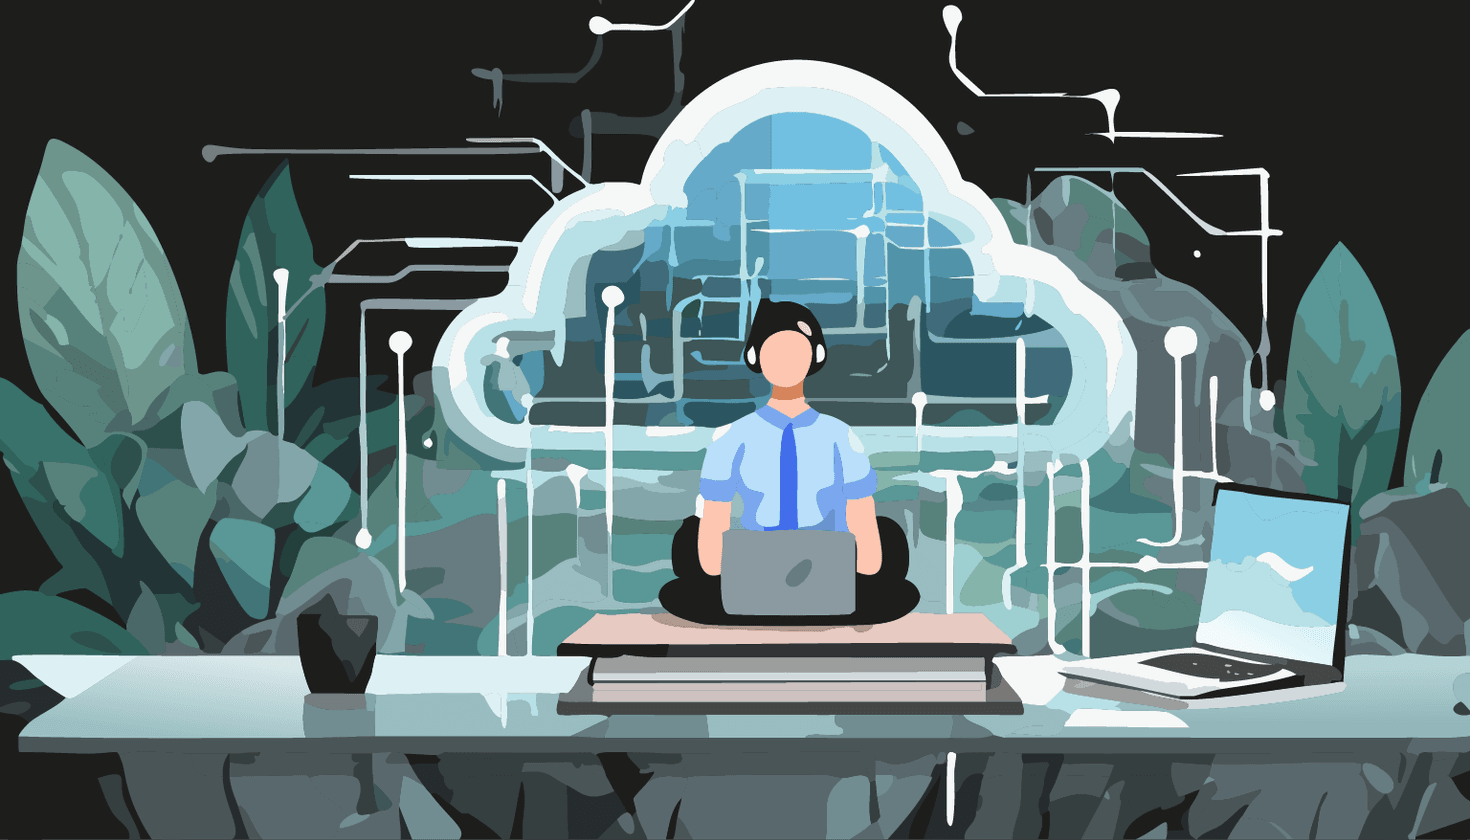 Engineer meditating with a laptop, surrounded by digital cloud graphics. Ideal for content on cloud-native technologies, digital transformation, and mindful tech practices.